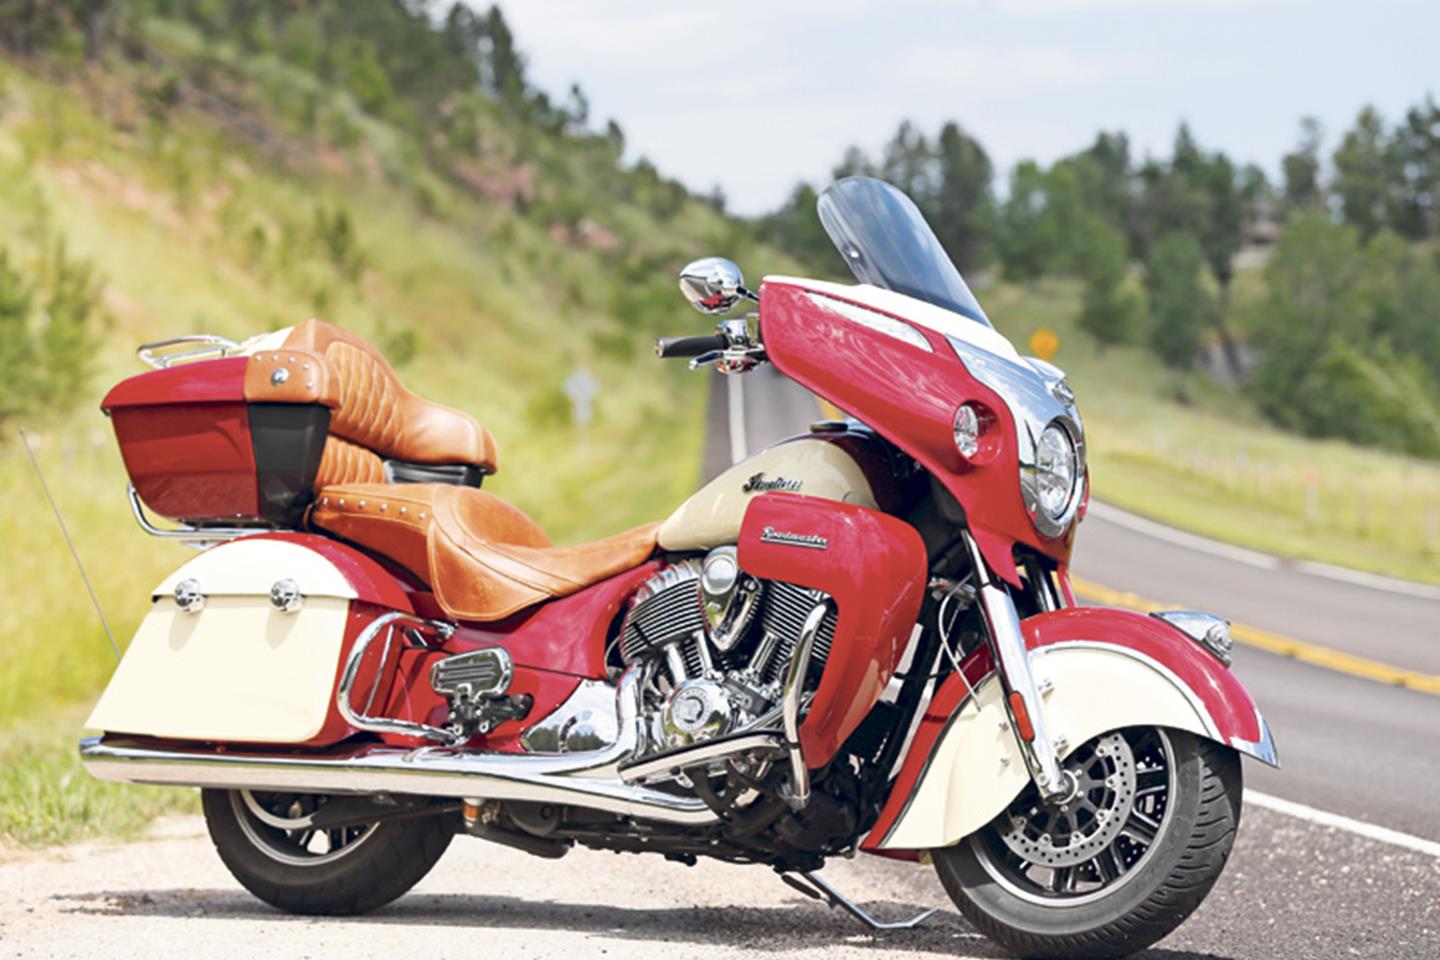 Indian Roadmaster should prove reliable based on our owners' reviews